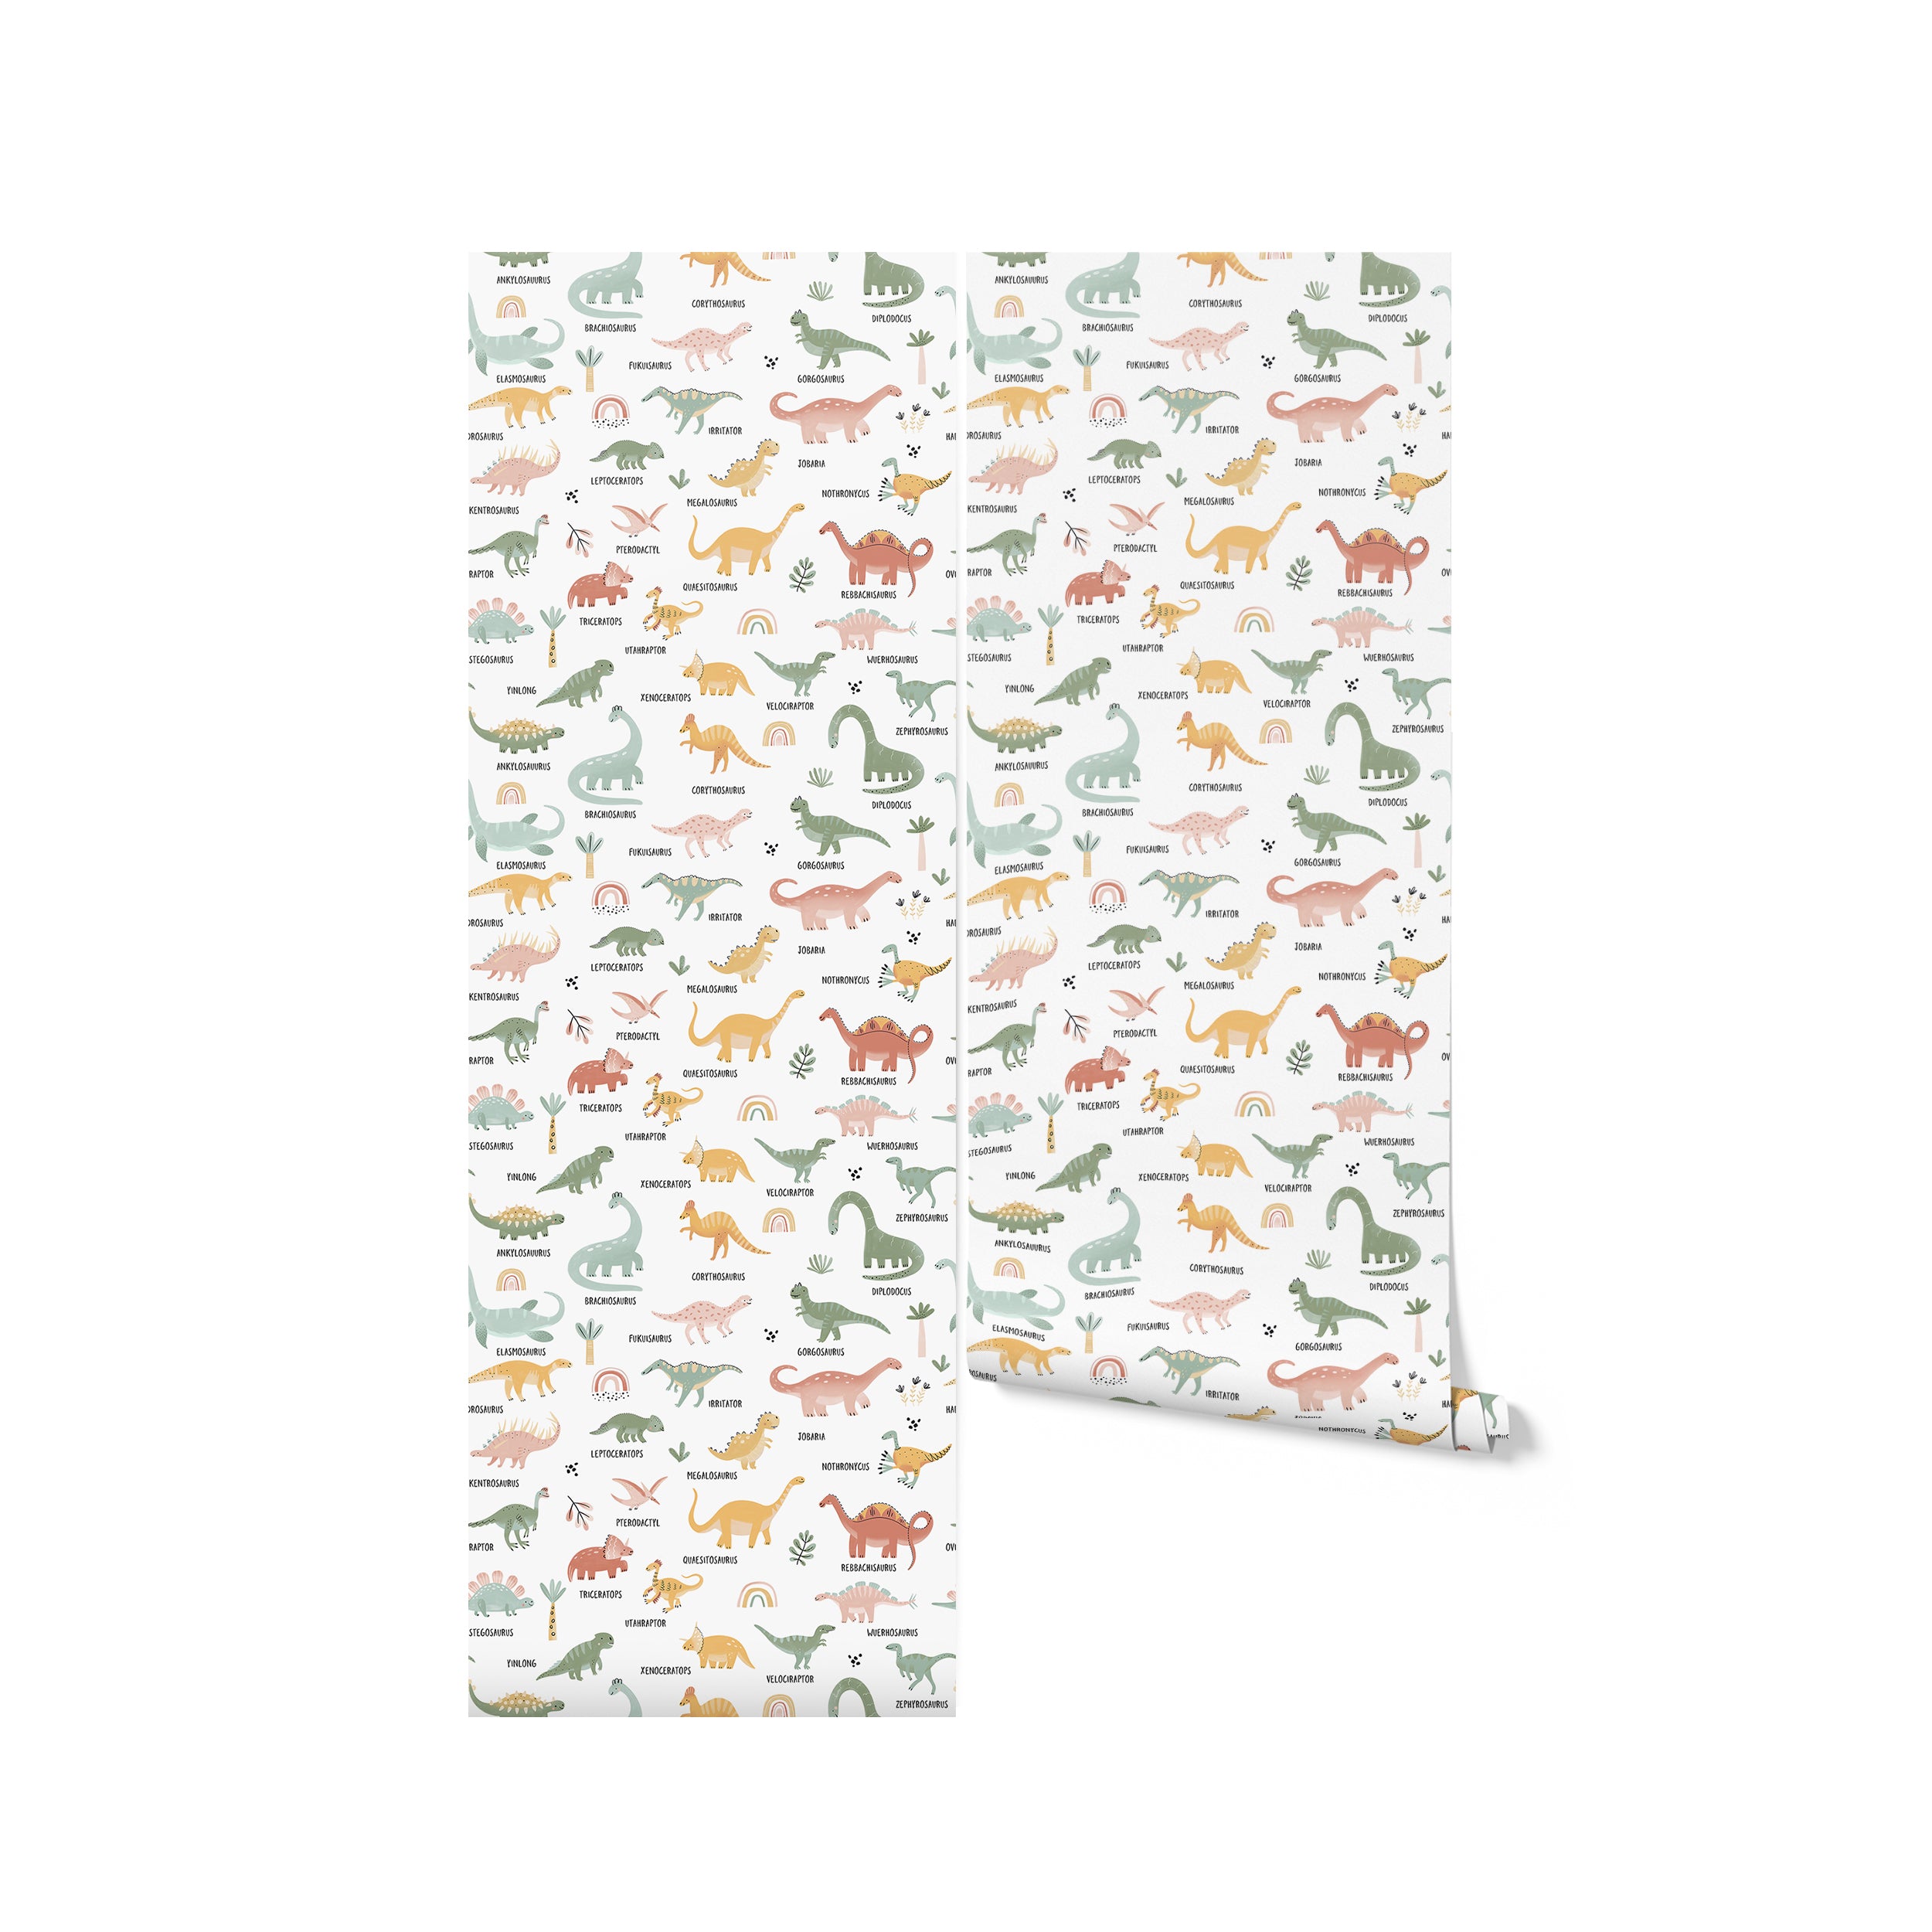 Roll of Dino World Kids Wallpaper II displaying a busy and colorful scene of various dinosaurs in pastel tones with their names, such as Diplodocus, Stegosaurus, and T-Rex, among greenery. Ideal for a child's nursery or play area to foster a love of nature and learning.